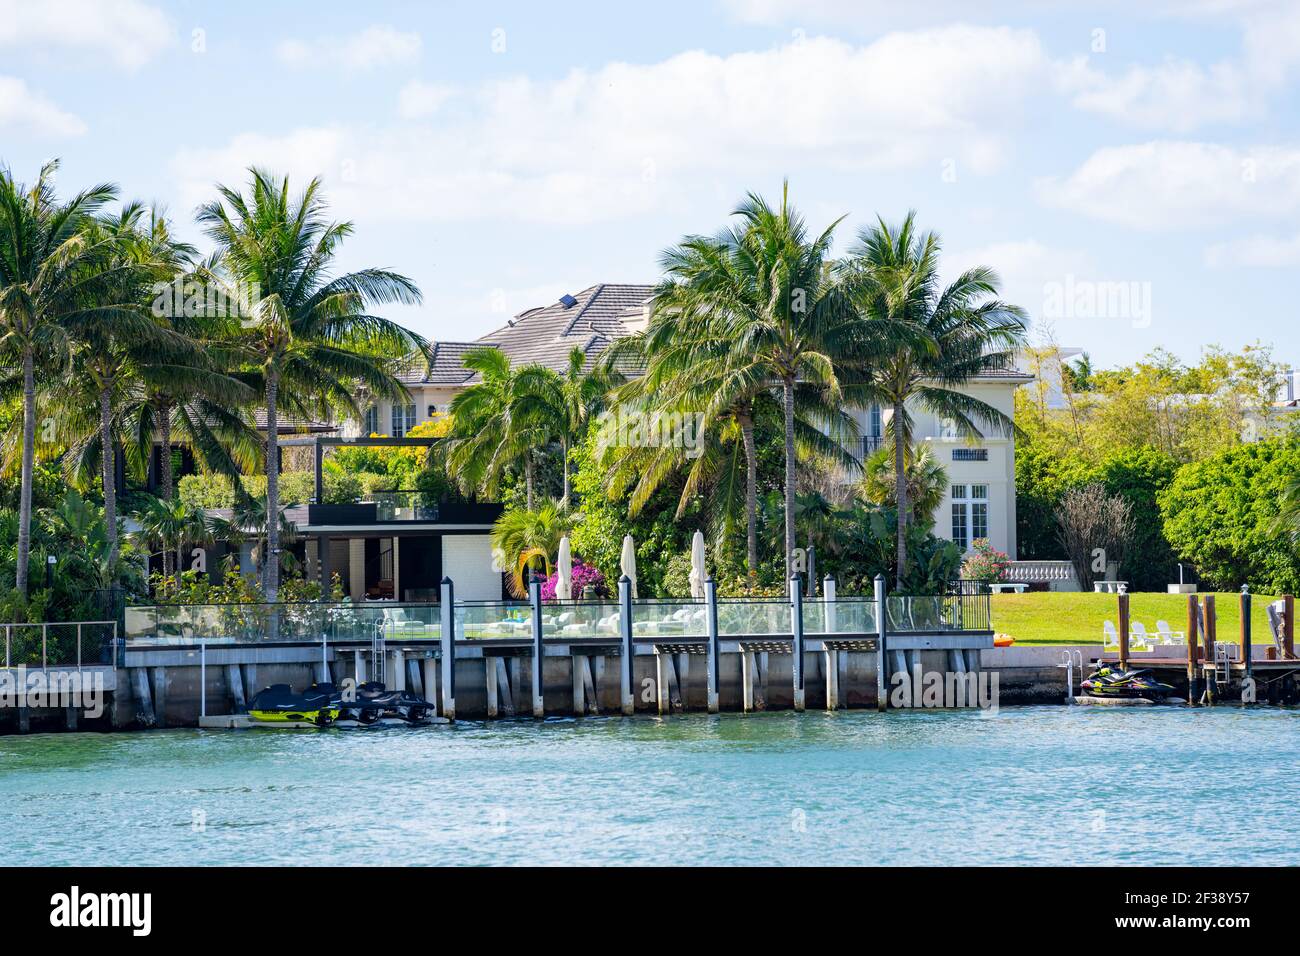 Waterfront Realty Miami Beach avec palmiers Banque D'Images